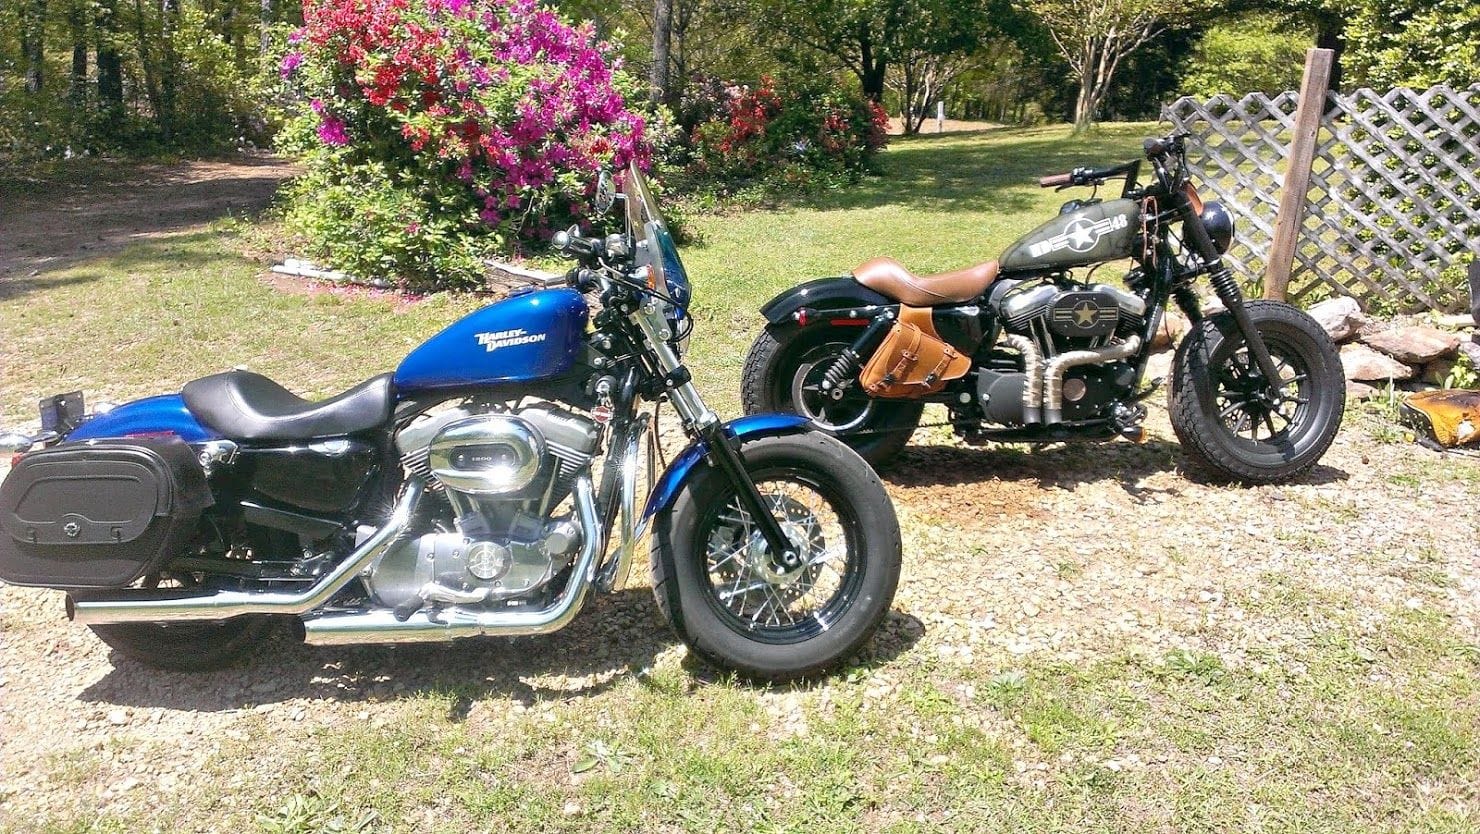 883 vs 1200 The real story? - Harley Davidson Forums